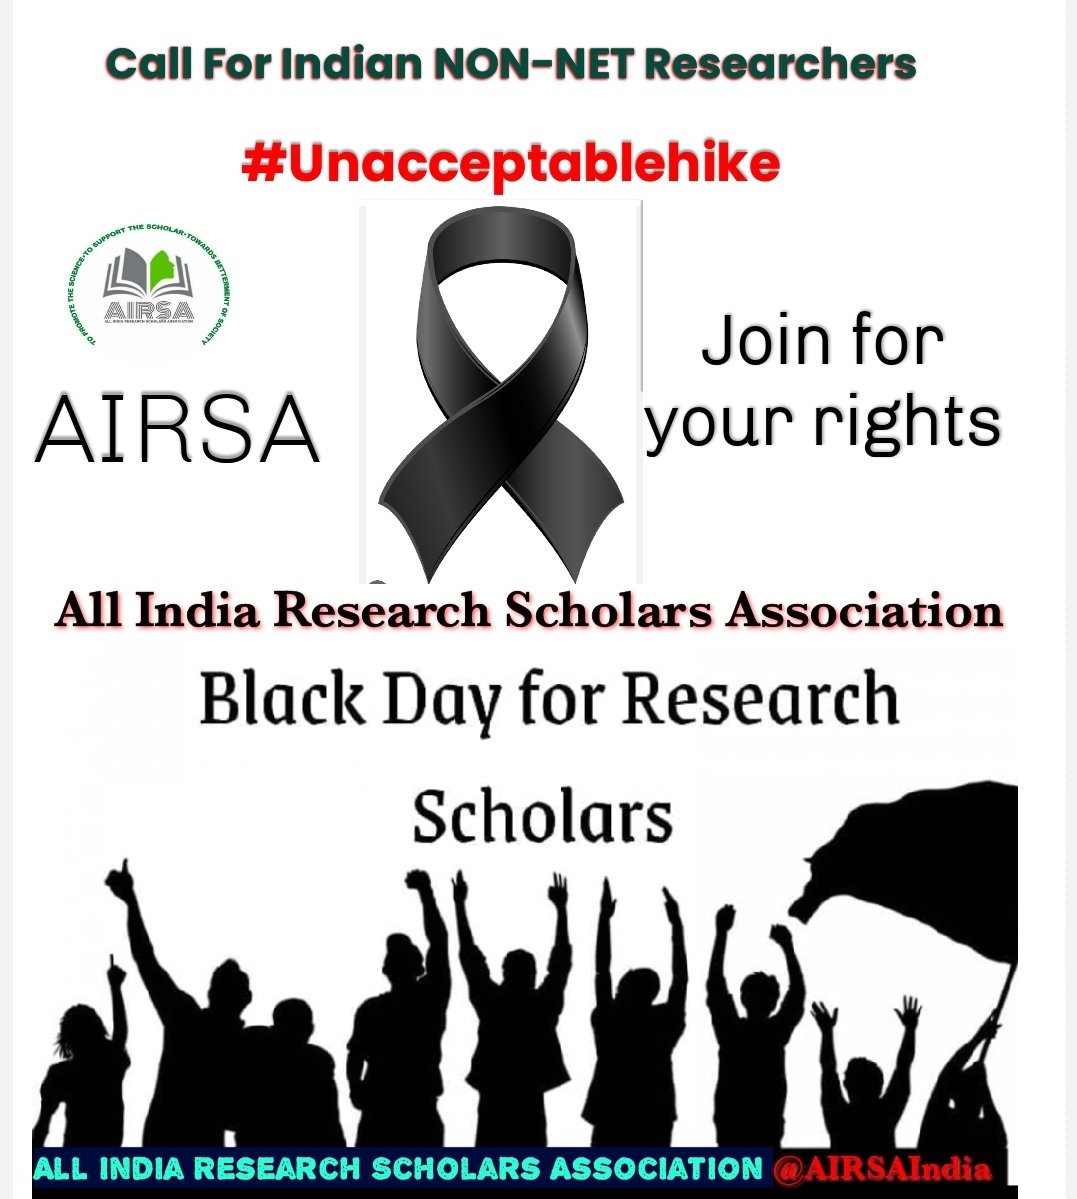 #Blackdayforresearchscholars
#Unacceptablehike
#Hikefellowship60
📢Unacceptable 19.4% hike in Indian research scholar fellowships. We demand a 60% fellowship hike! @AIRSA is calling for a meeting to address this issue and support our scholars.A Black Day for Indian Research…